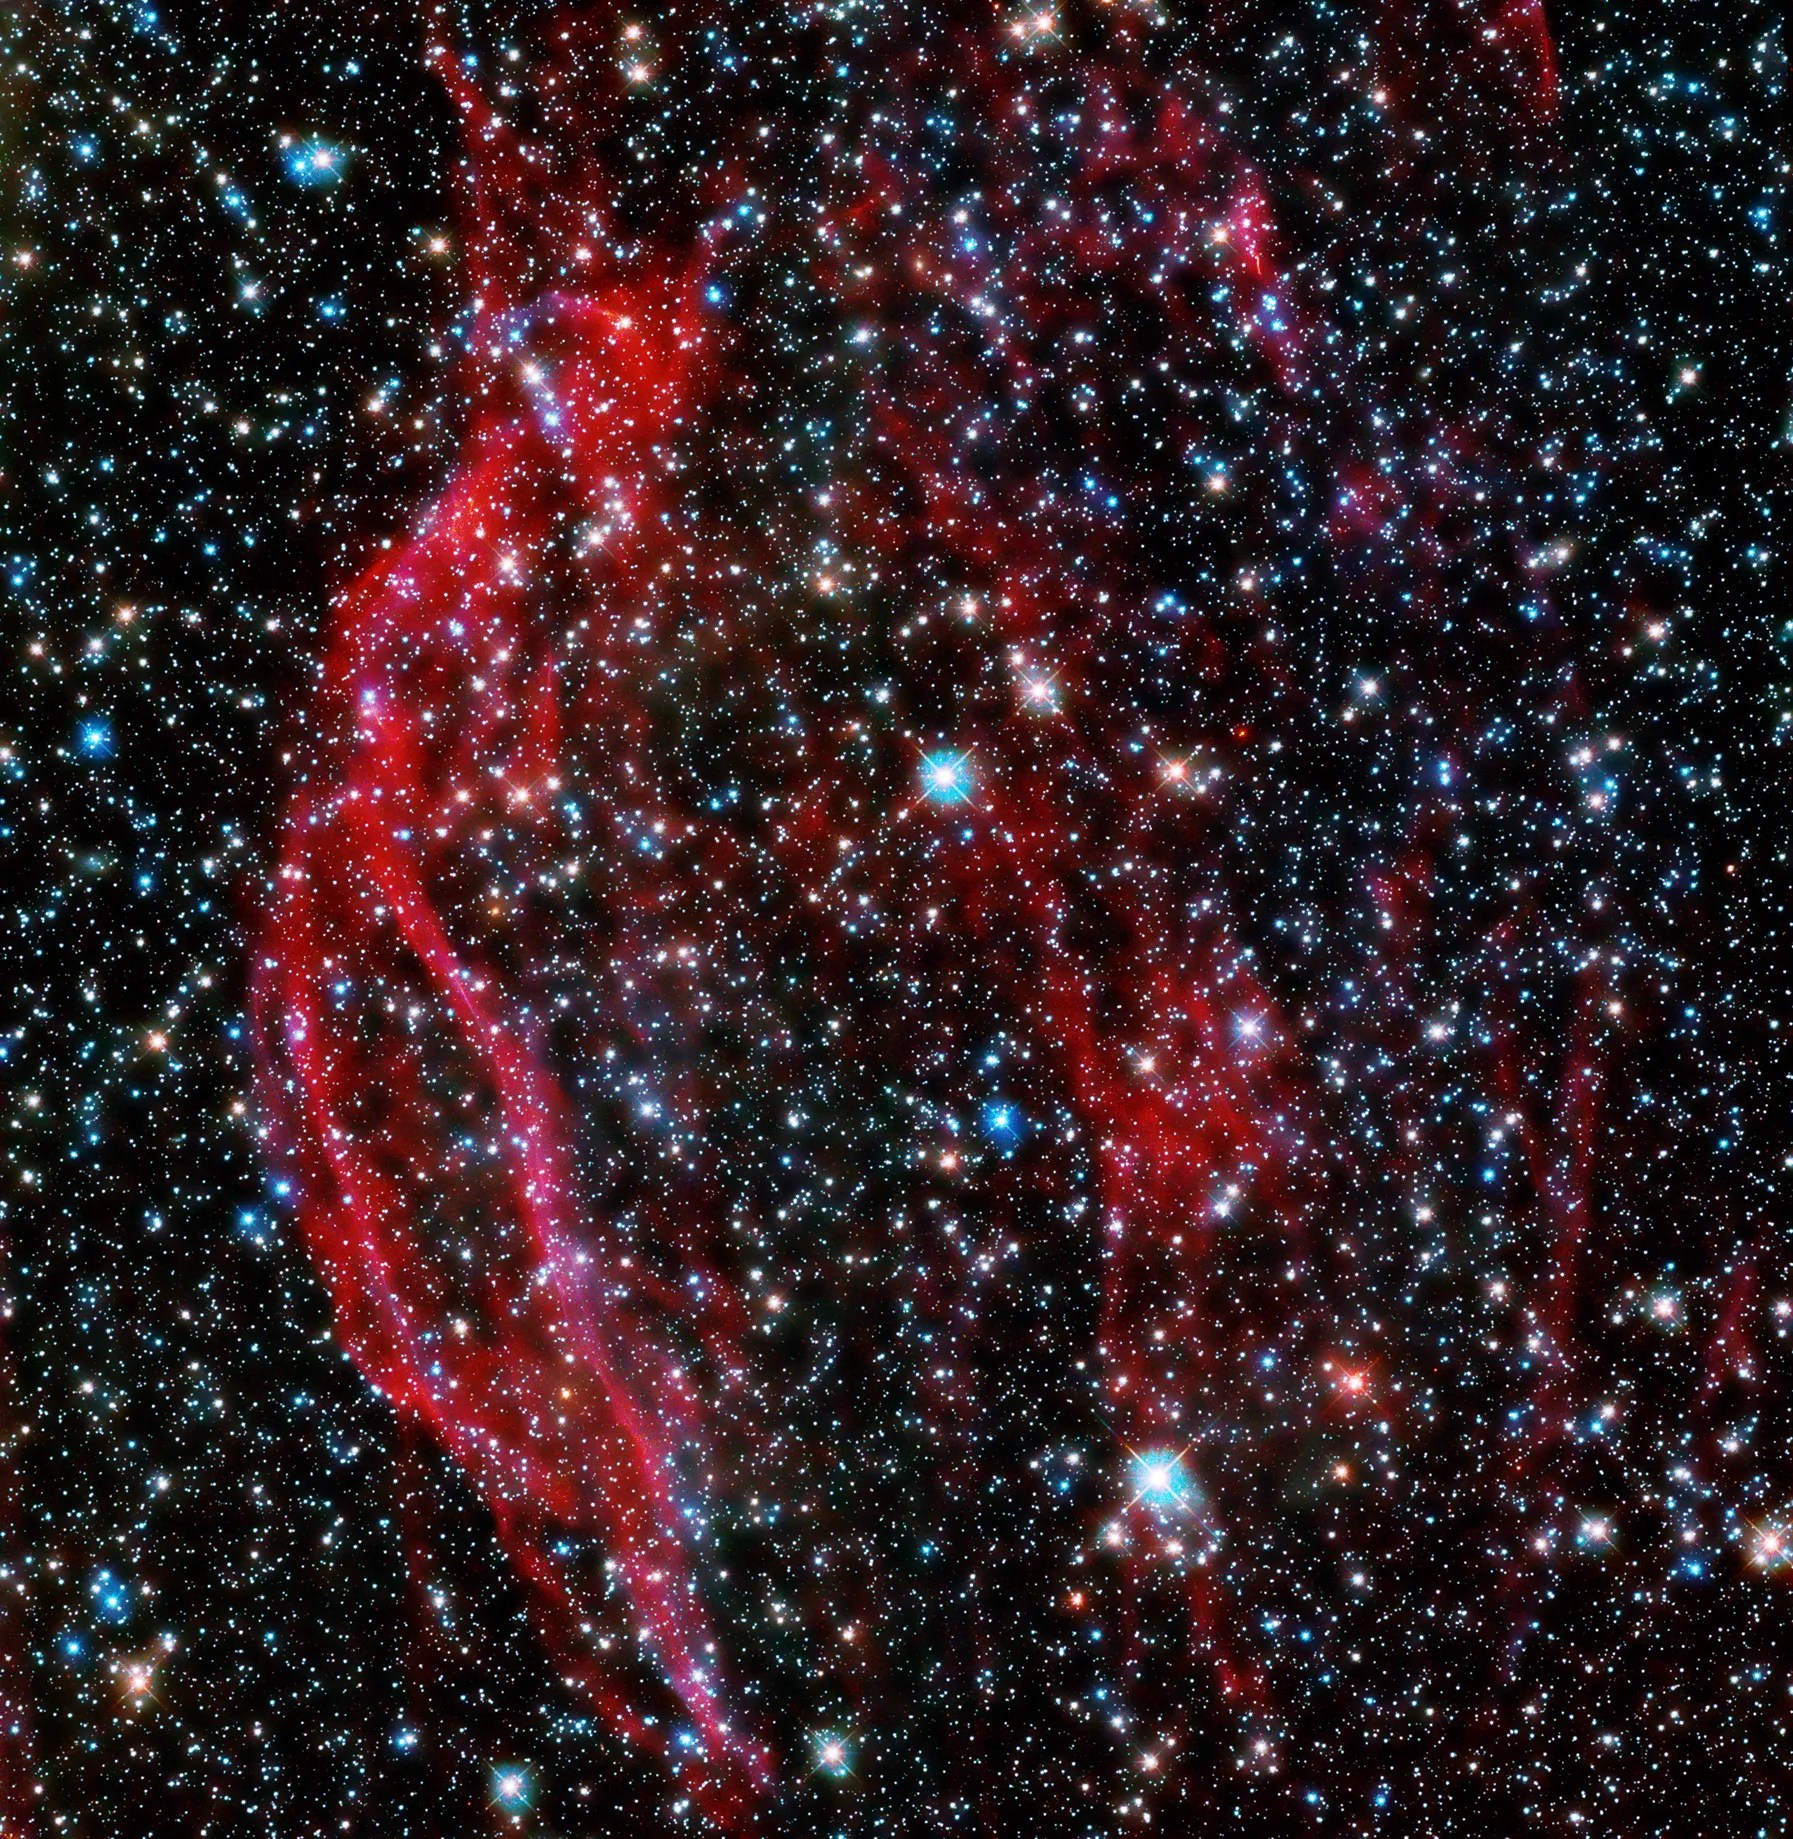 Hubble space telescope images the glowing red tendrils of gas from the supernova remnant, dem l249.